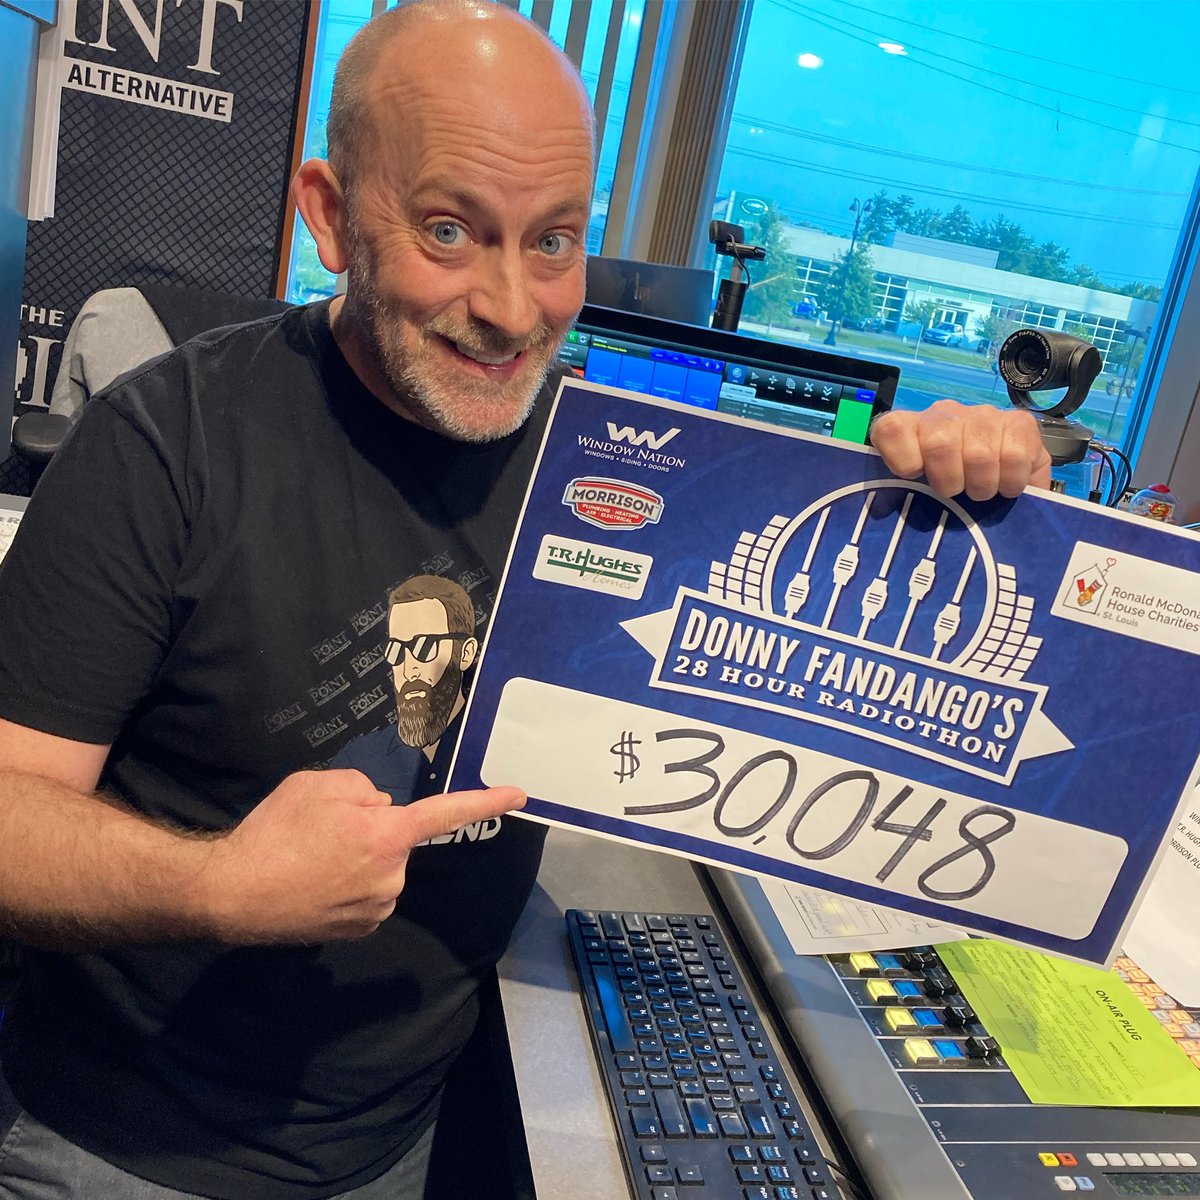 Not even 8pm and we already passed $30k to support @rmhcstl!!! Amazing! Please keep those donations coming! Big thanks to our #28HourRadiothon sponsors @windownation, @TR_Hughes_Homes, and Morrison Plumbing, Heating, Air, and Electric